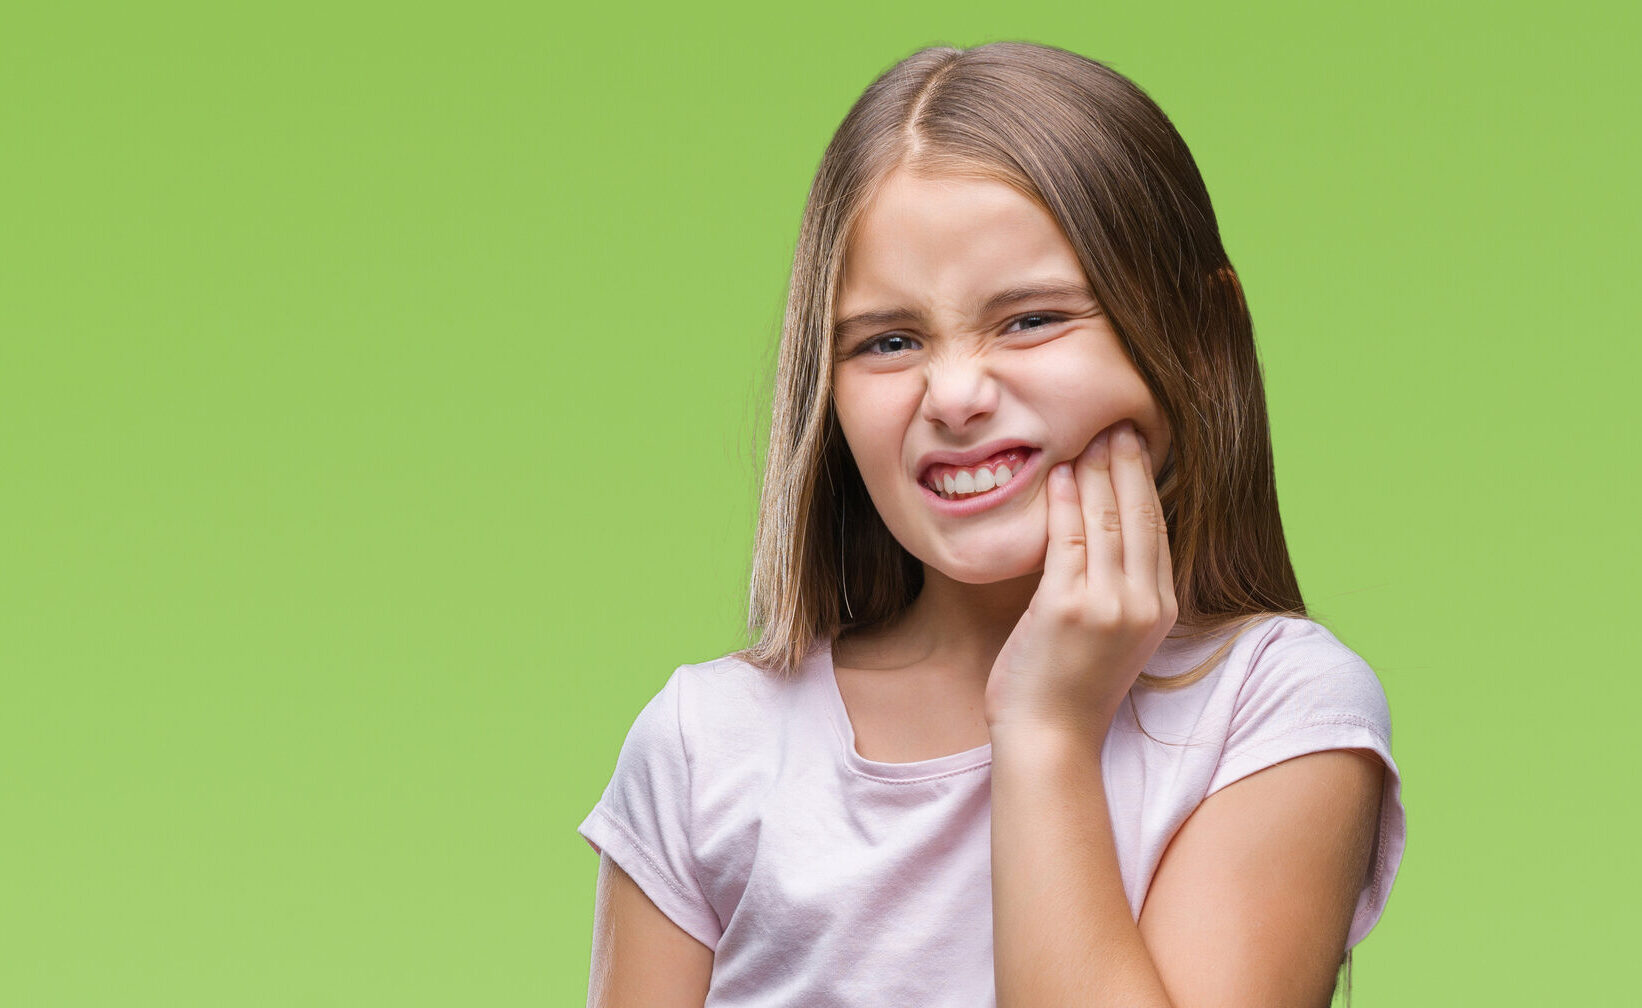 Young beautiful girl over isolated background touching mouth with hand with painful expression because of toothache or dental illness on teeth. Dentist concept.